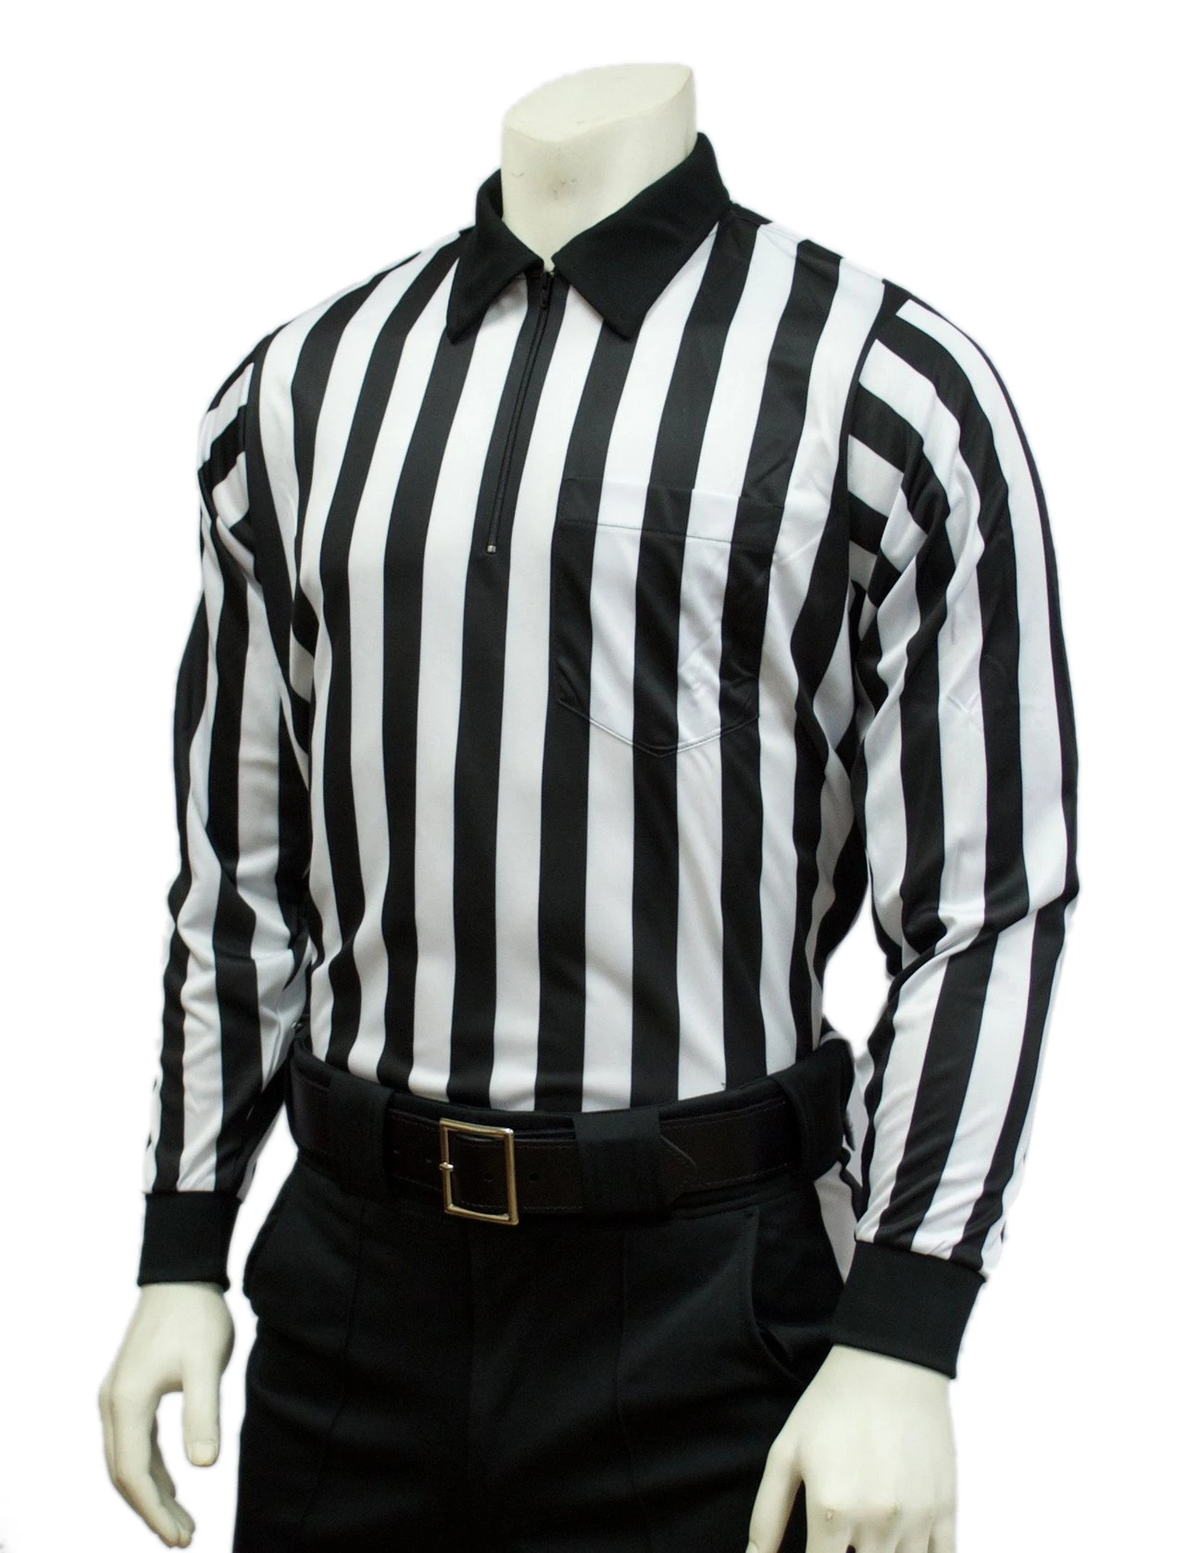 Smitty | FBS-113 | Cold Weather Long Sleeve Referee Shirt